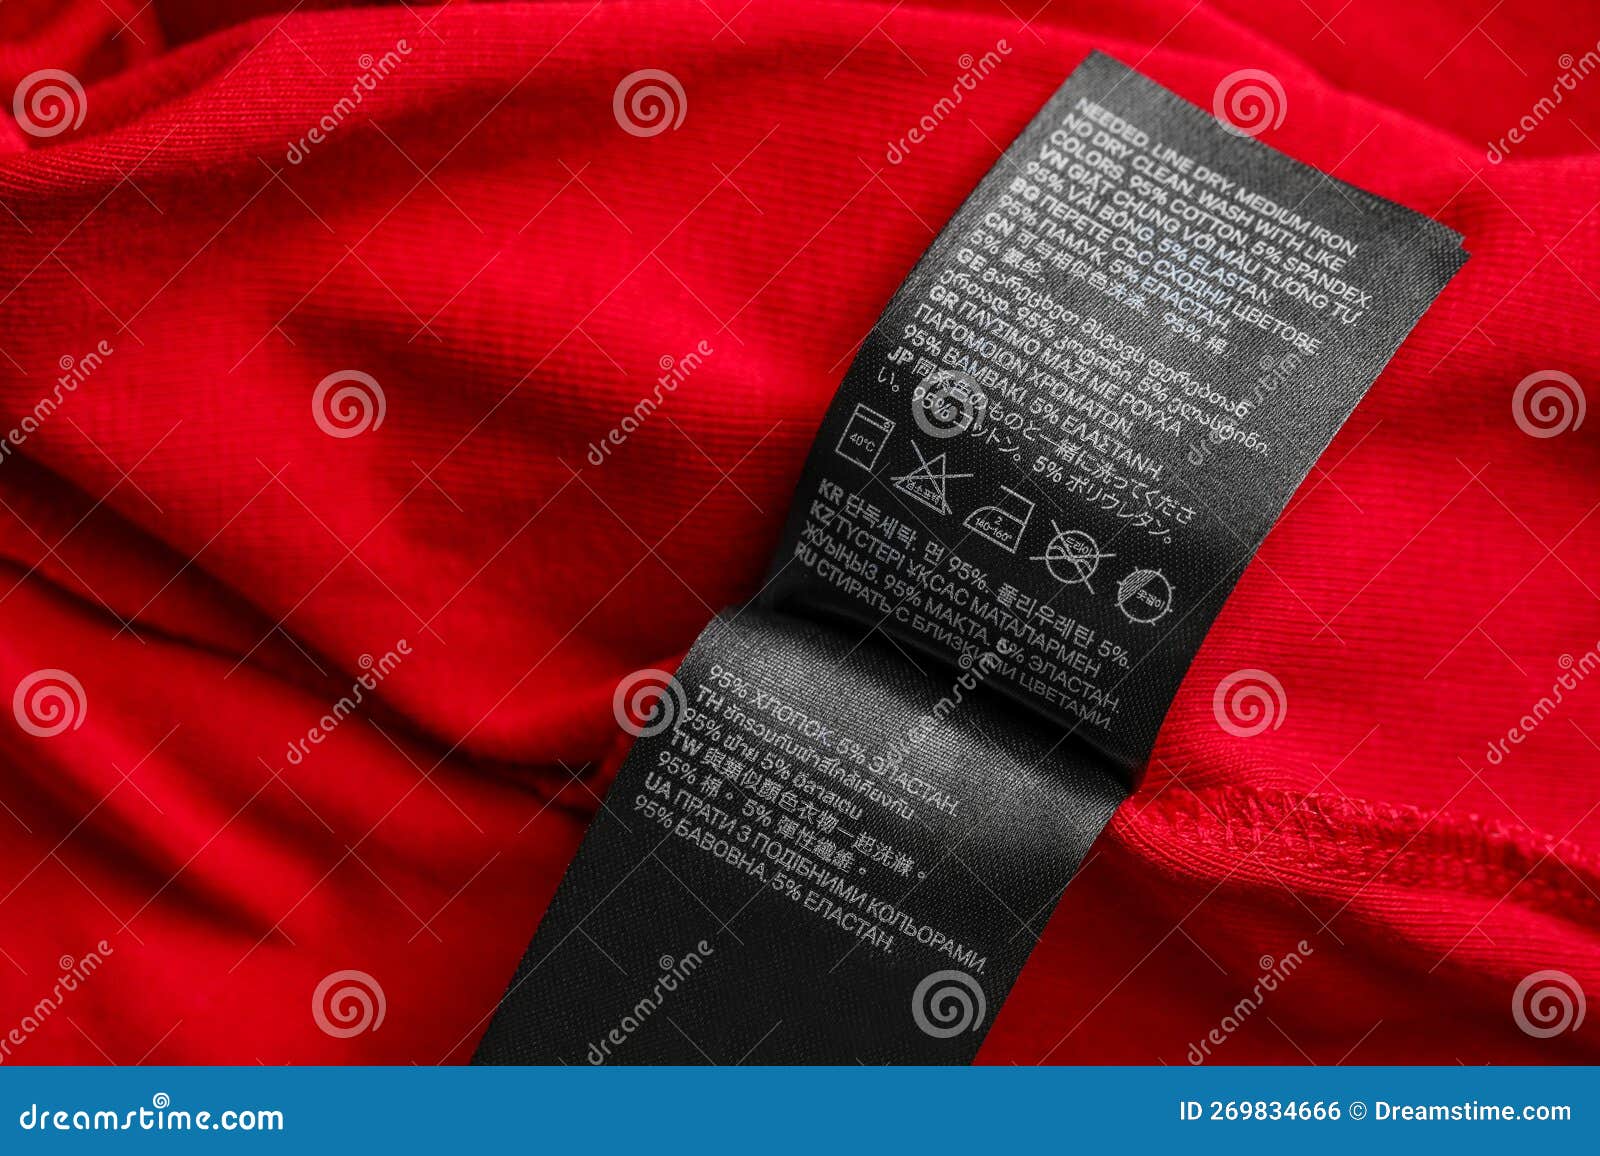 Black Clothing Labels on Red Garment, Top View Stock Photo - Image of ...